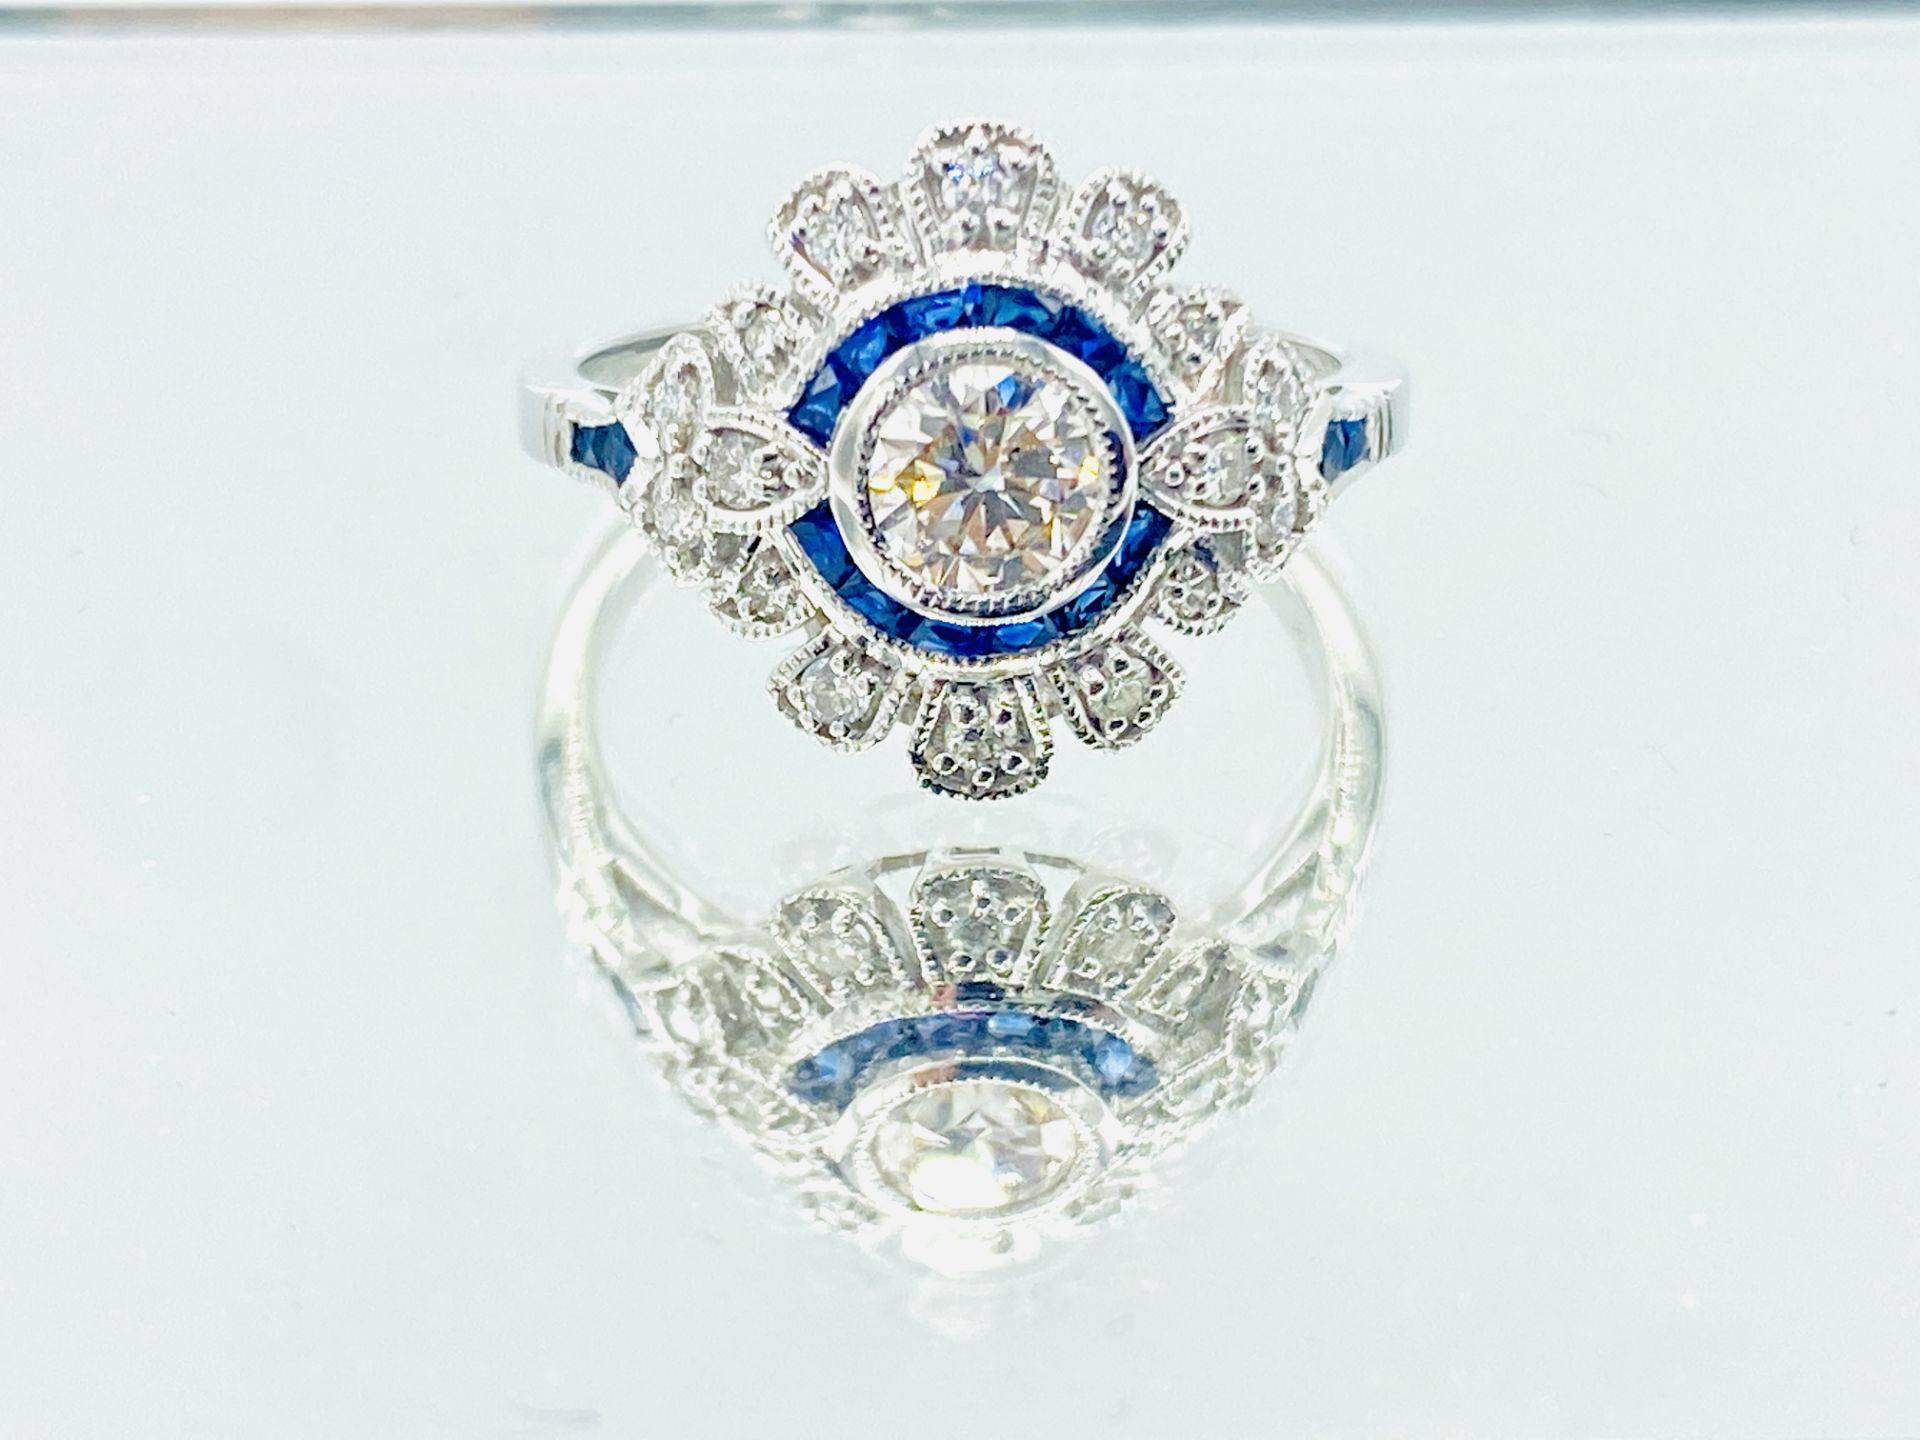 18ct white gold, diamond and sapphire ring - Image 2 of 5